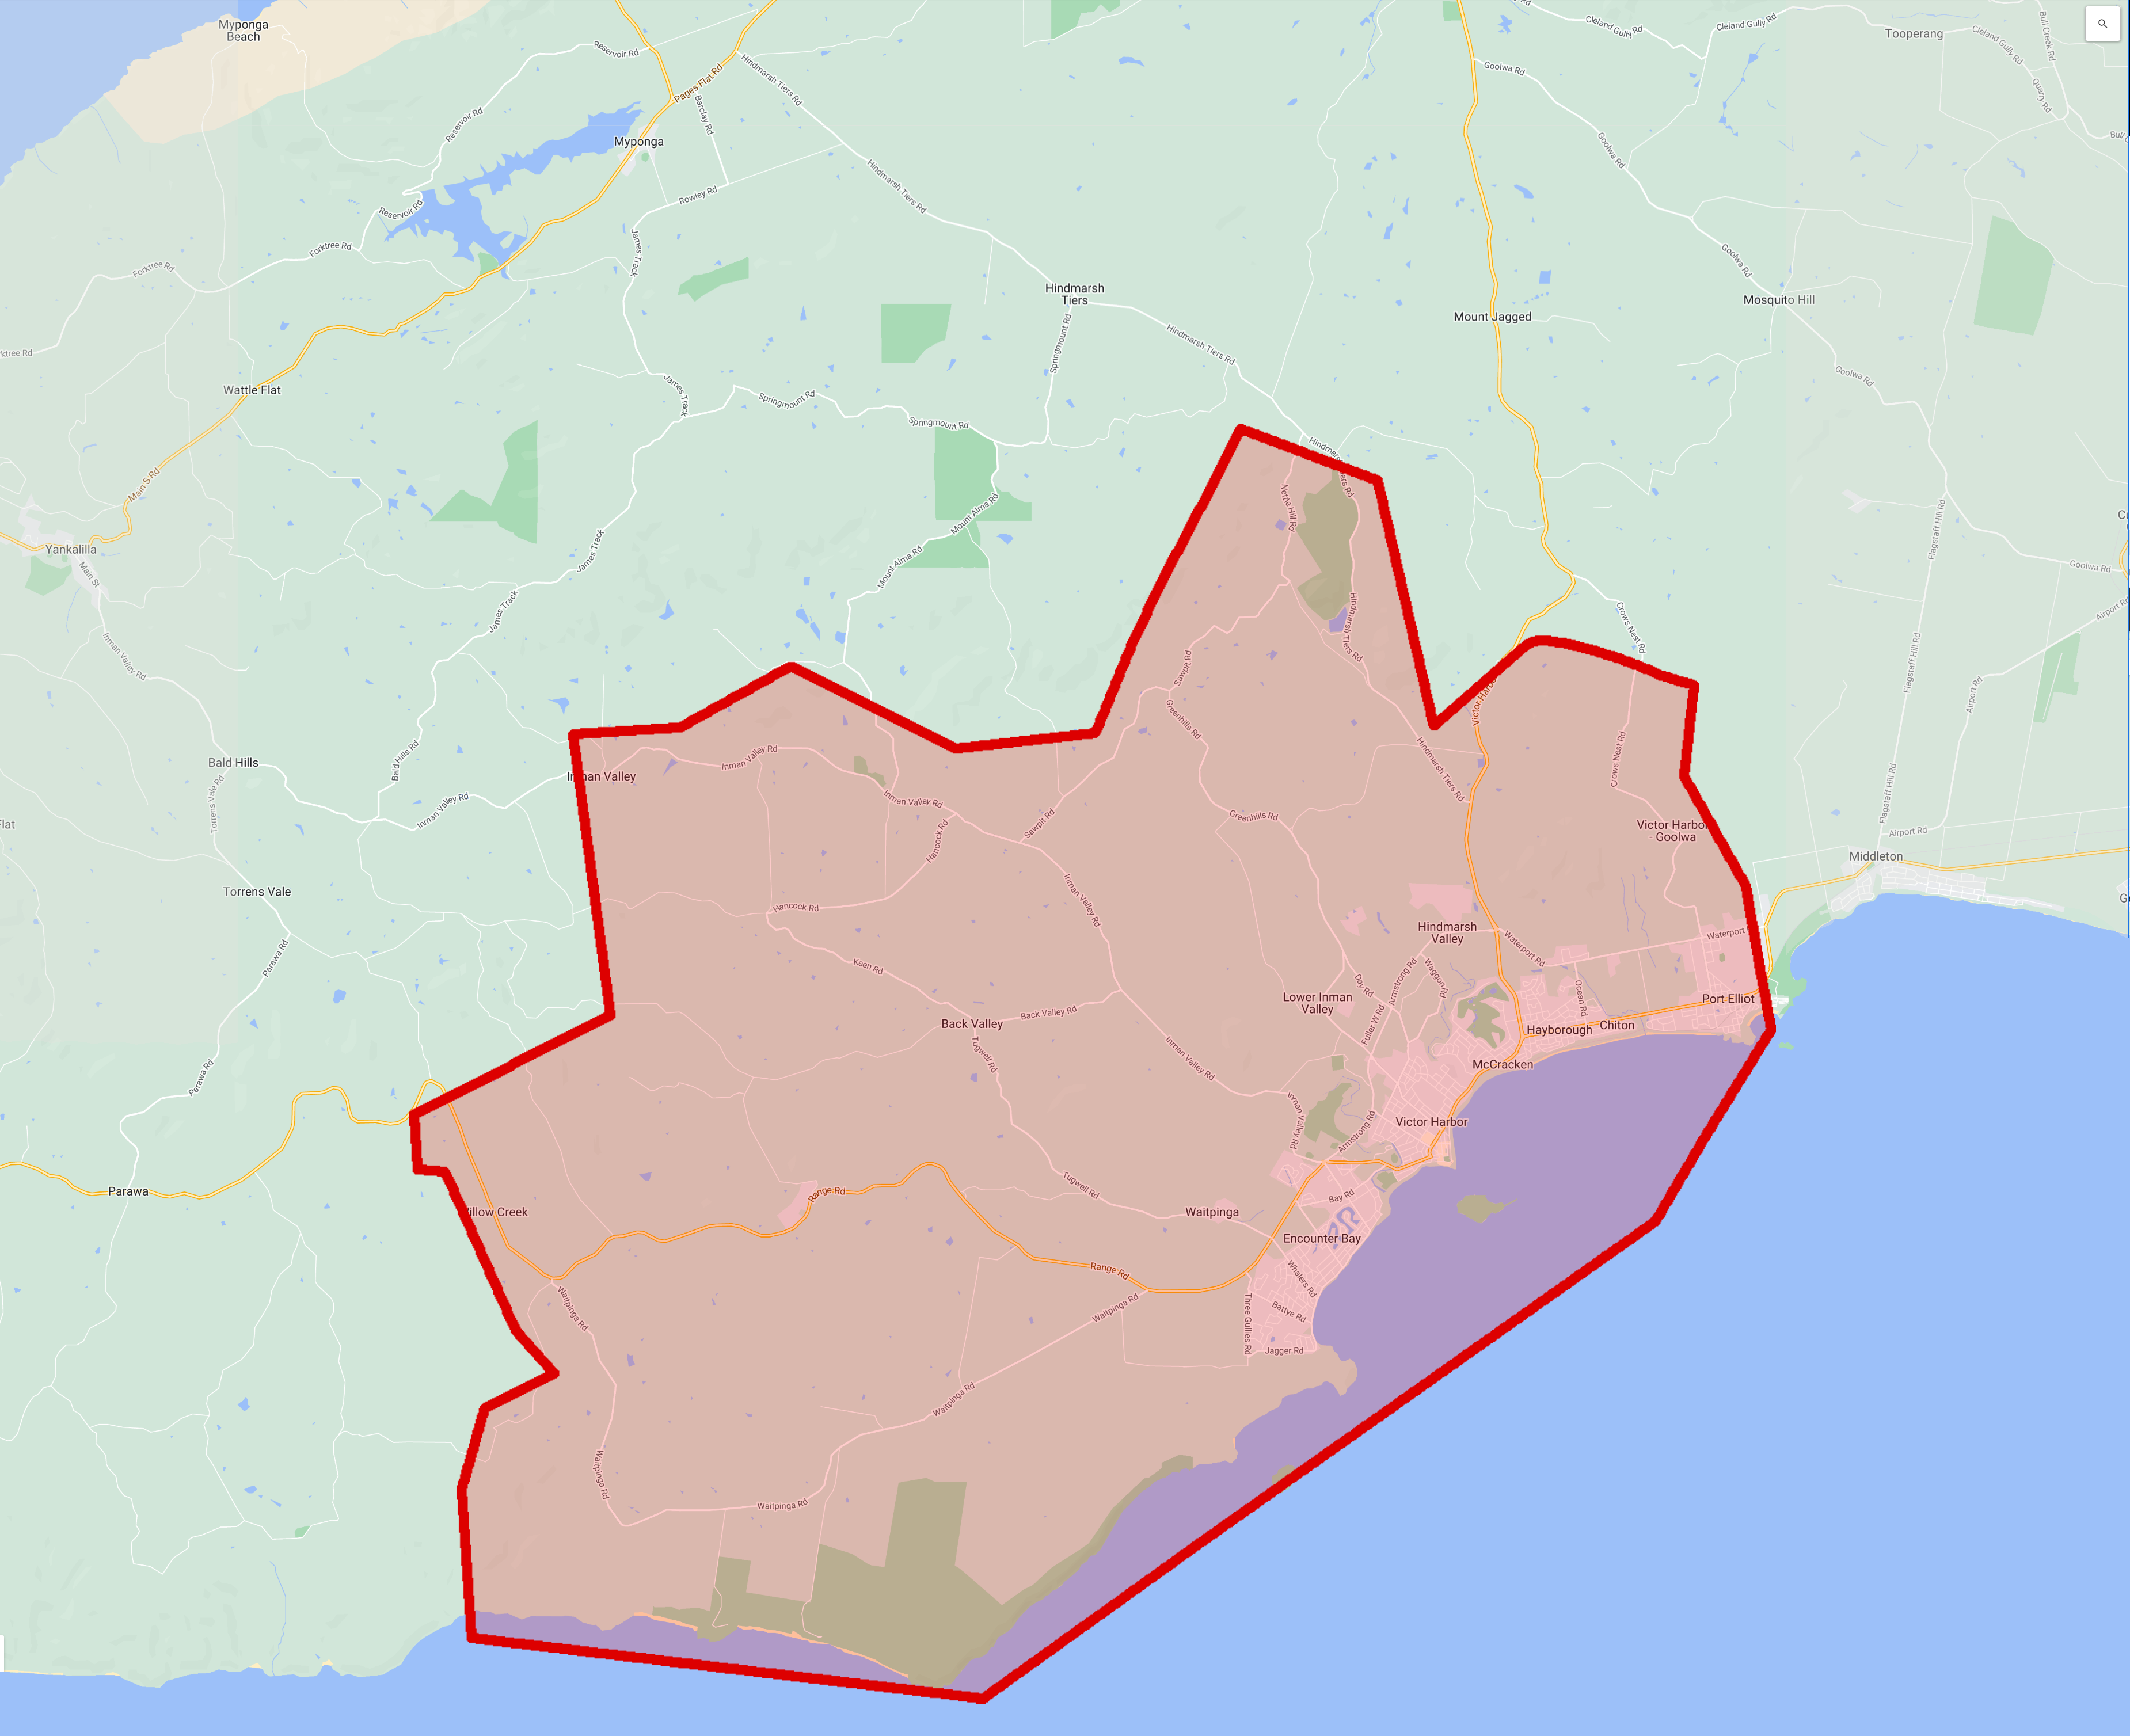 A map showing the indicative area that will be affected by a power outage during maintenance work on the substation at Victor Harbor in South Australia.